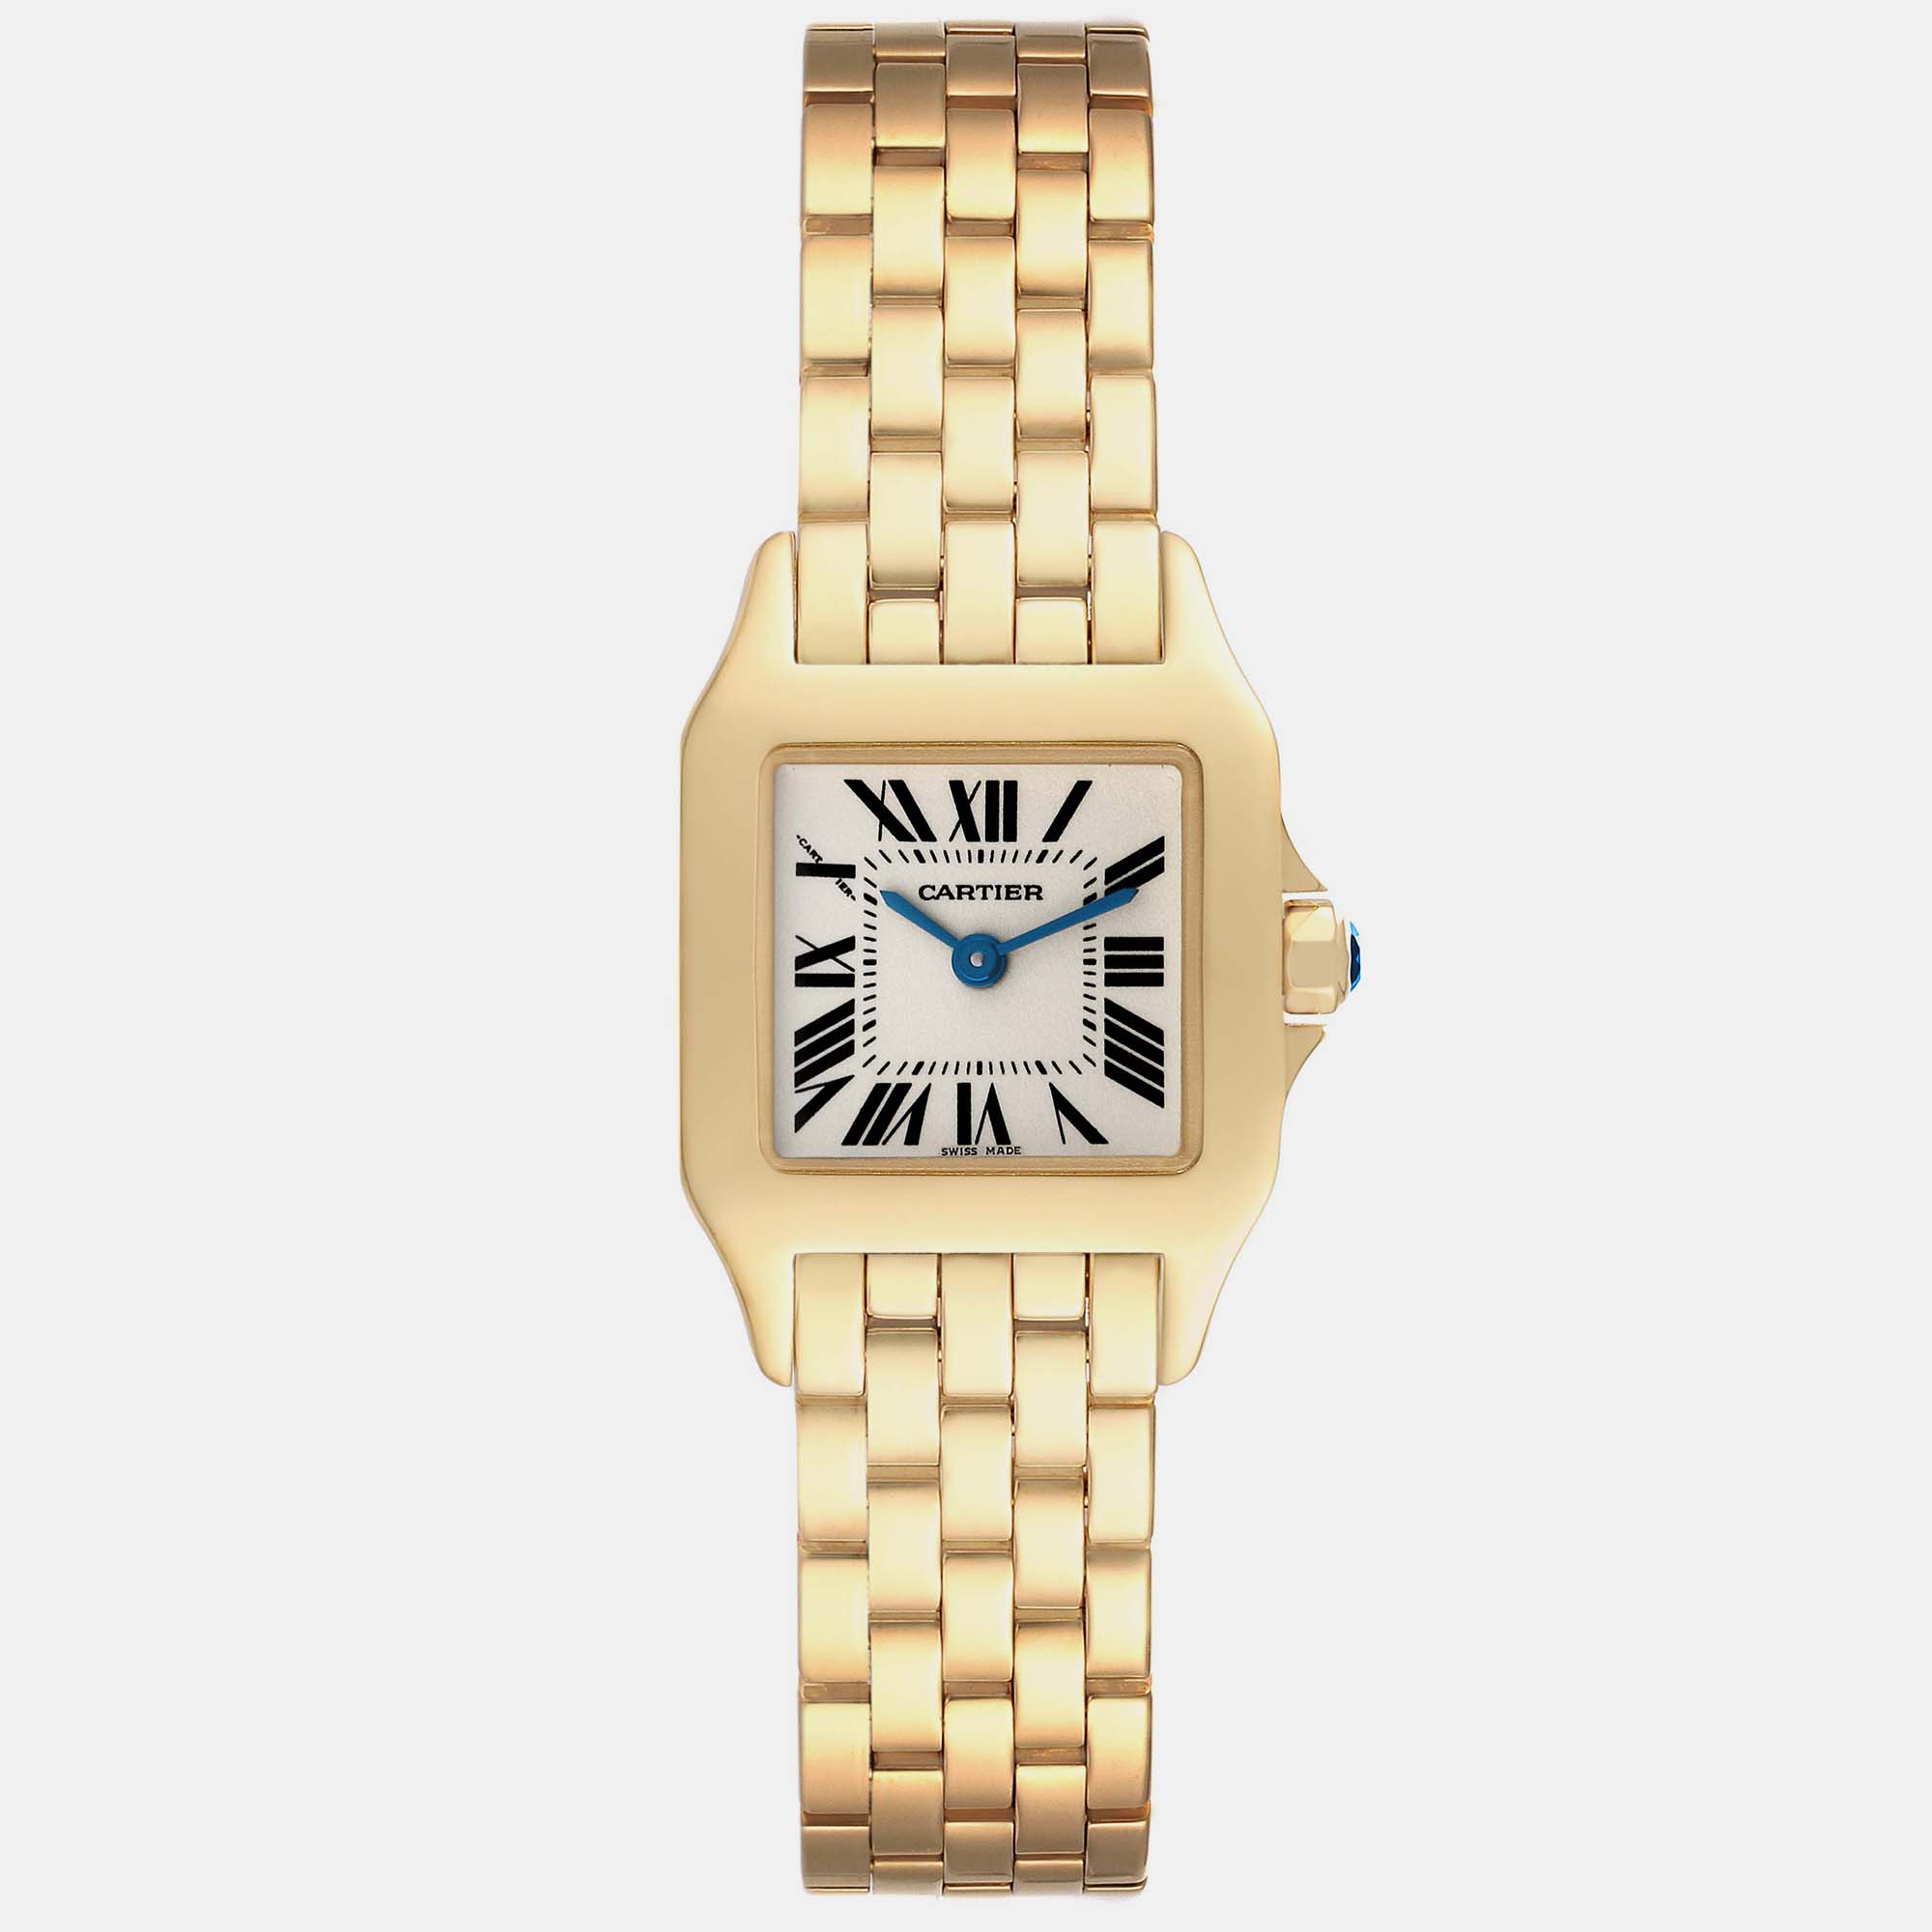 Cartier santos demoiselle yellow gold silver dial ladies watch 21 mm